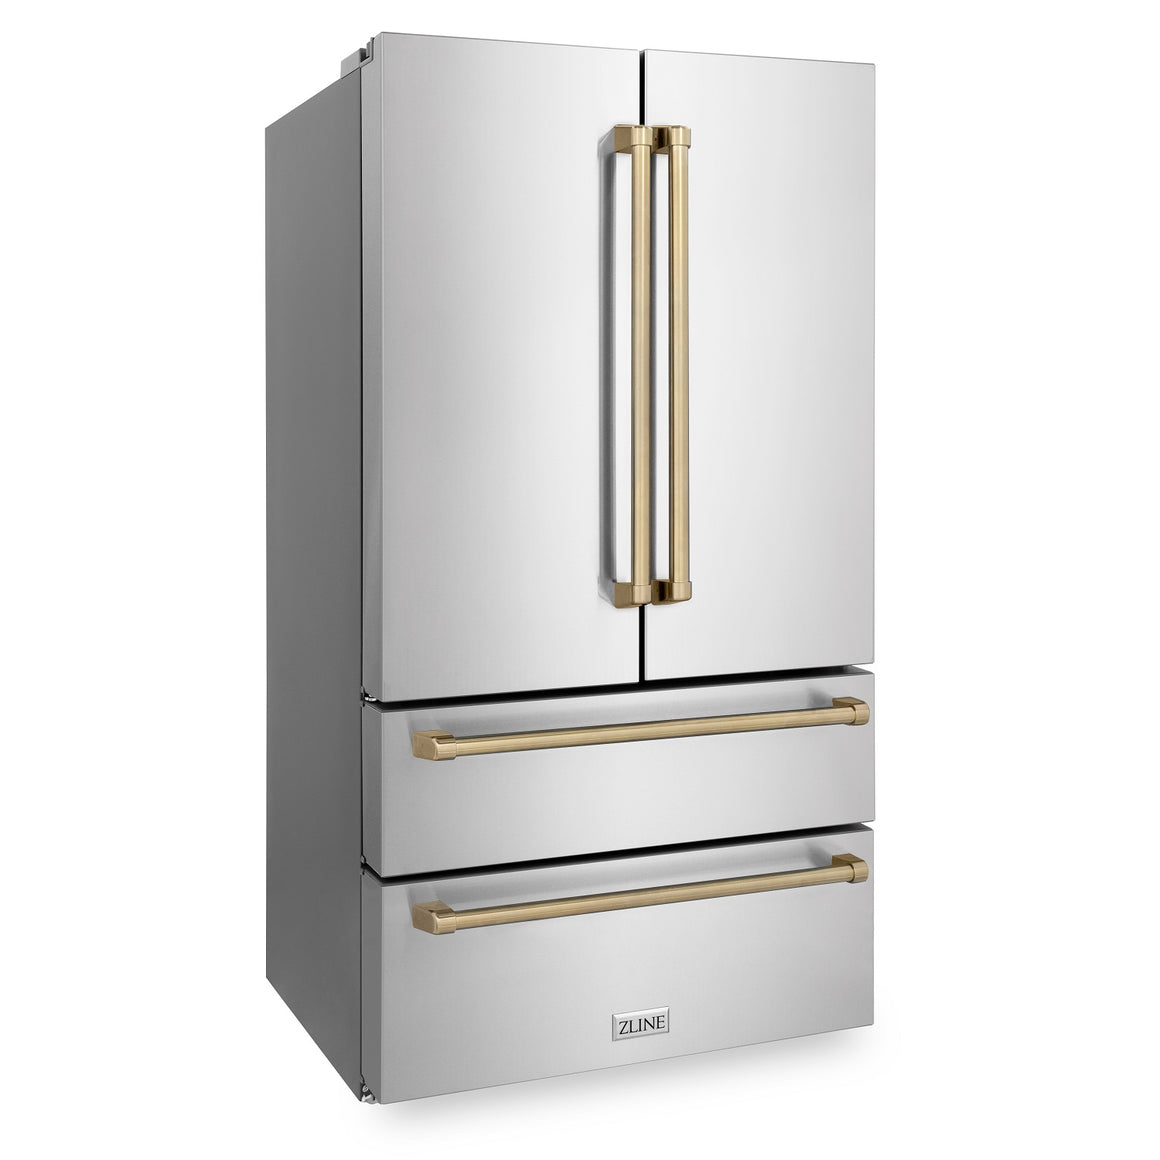 ZLINE 36" Autograph Edition 22.5 cu. ft French Door Refrigerator with Ice Maker in Fingerprint Resistant Stainless Steel with Champagne Bronze Accents